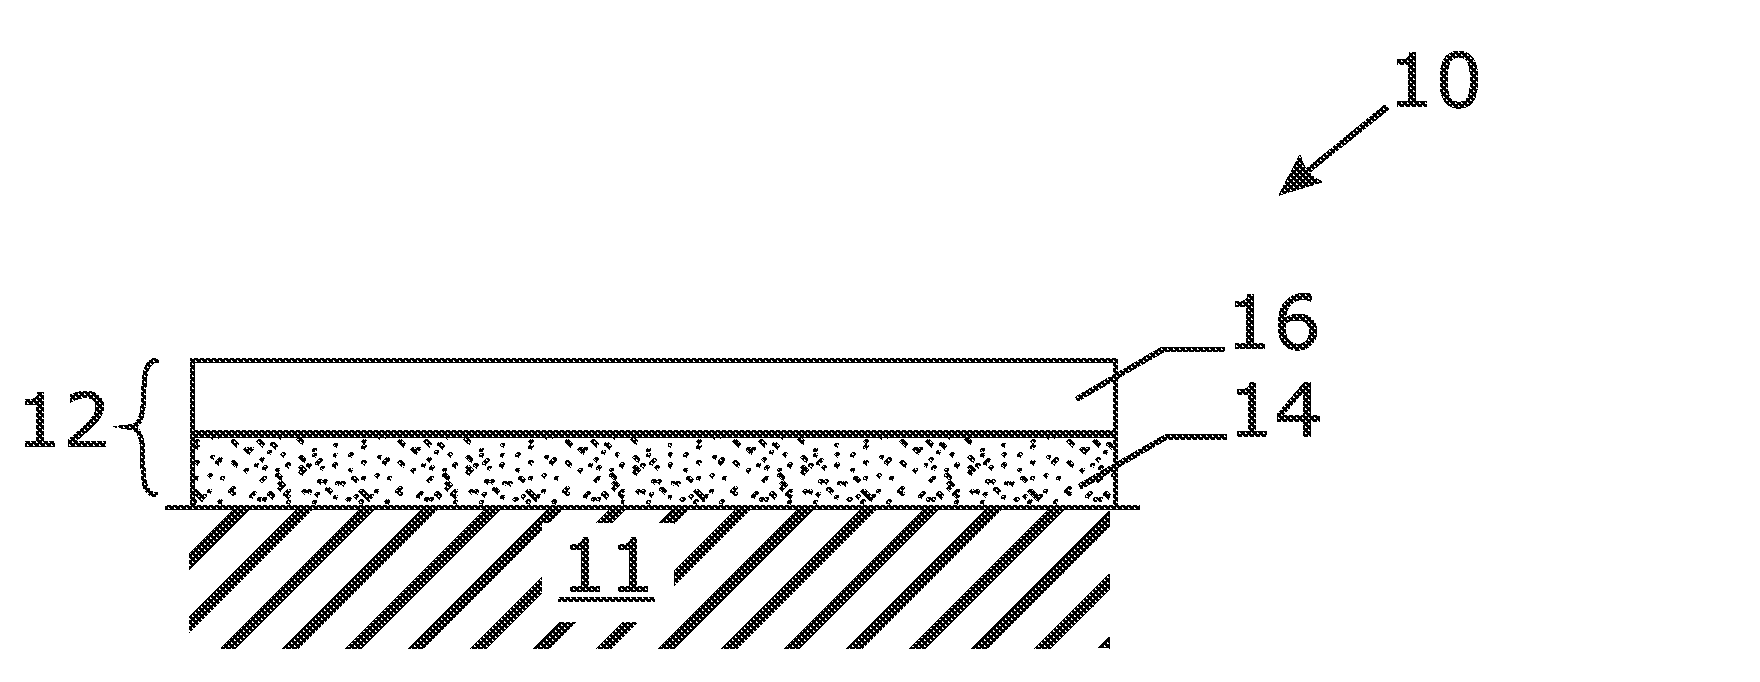 Substrate Coated with a Layered Structure Comprising a Tetrahedral Carbon Layer and a Softer Outer Layer